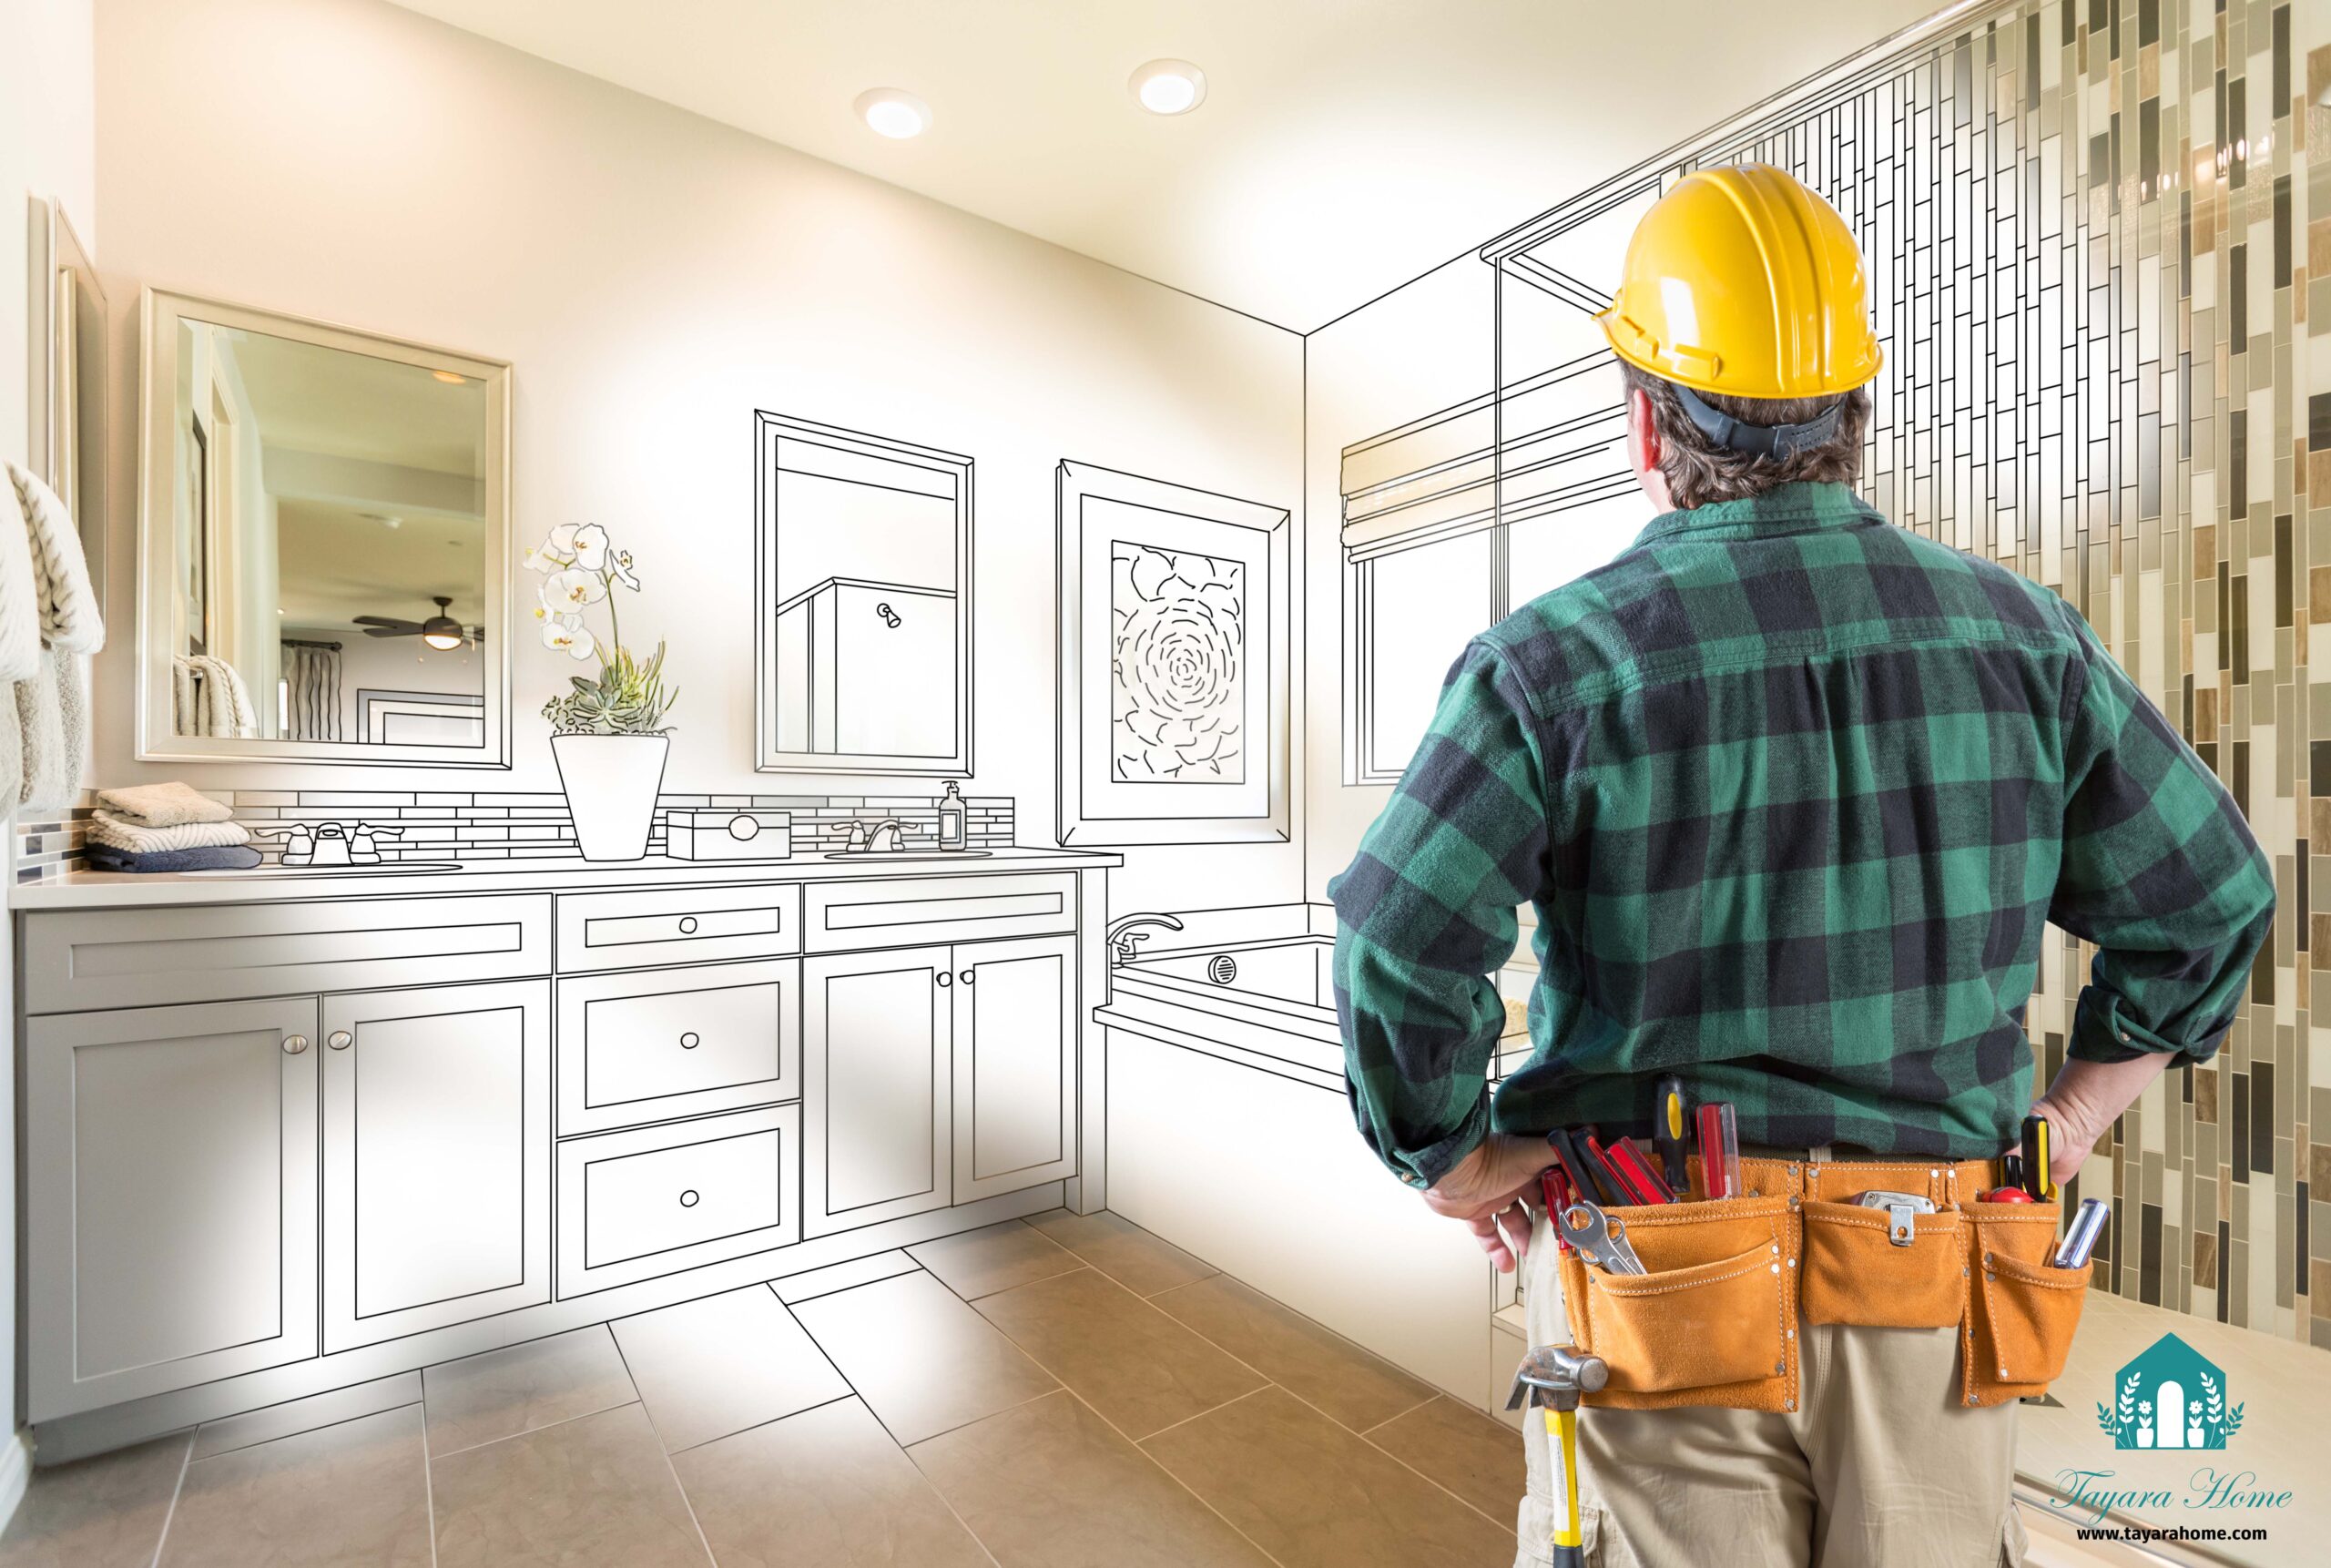 DIY or hire a professional for your bathroom remodeling?